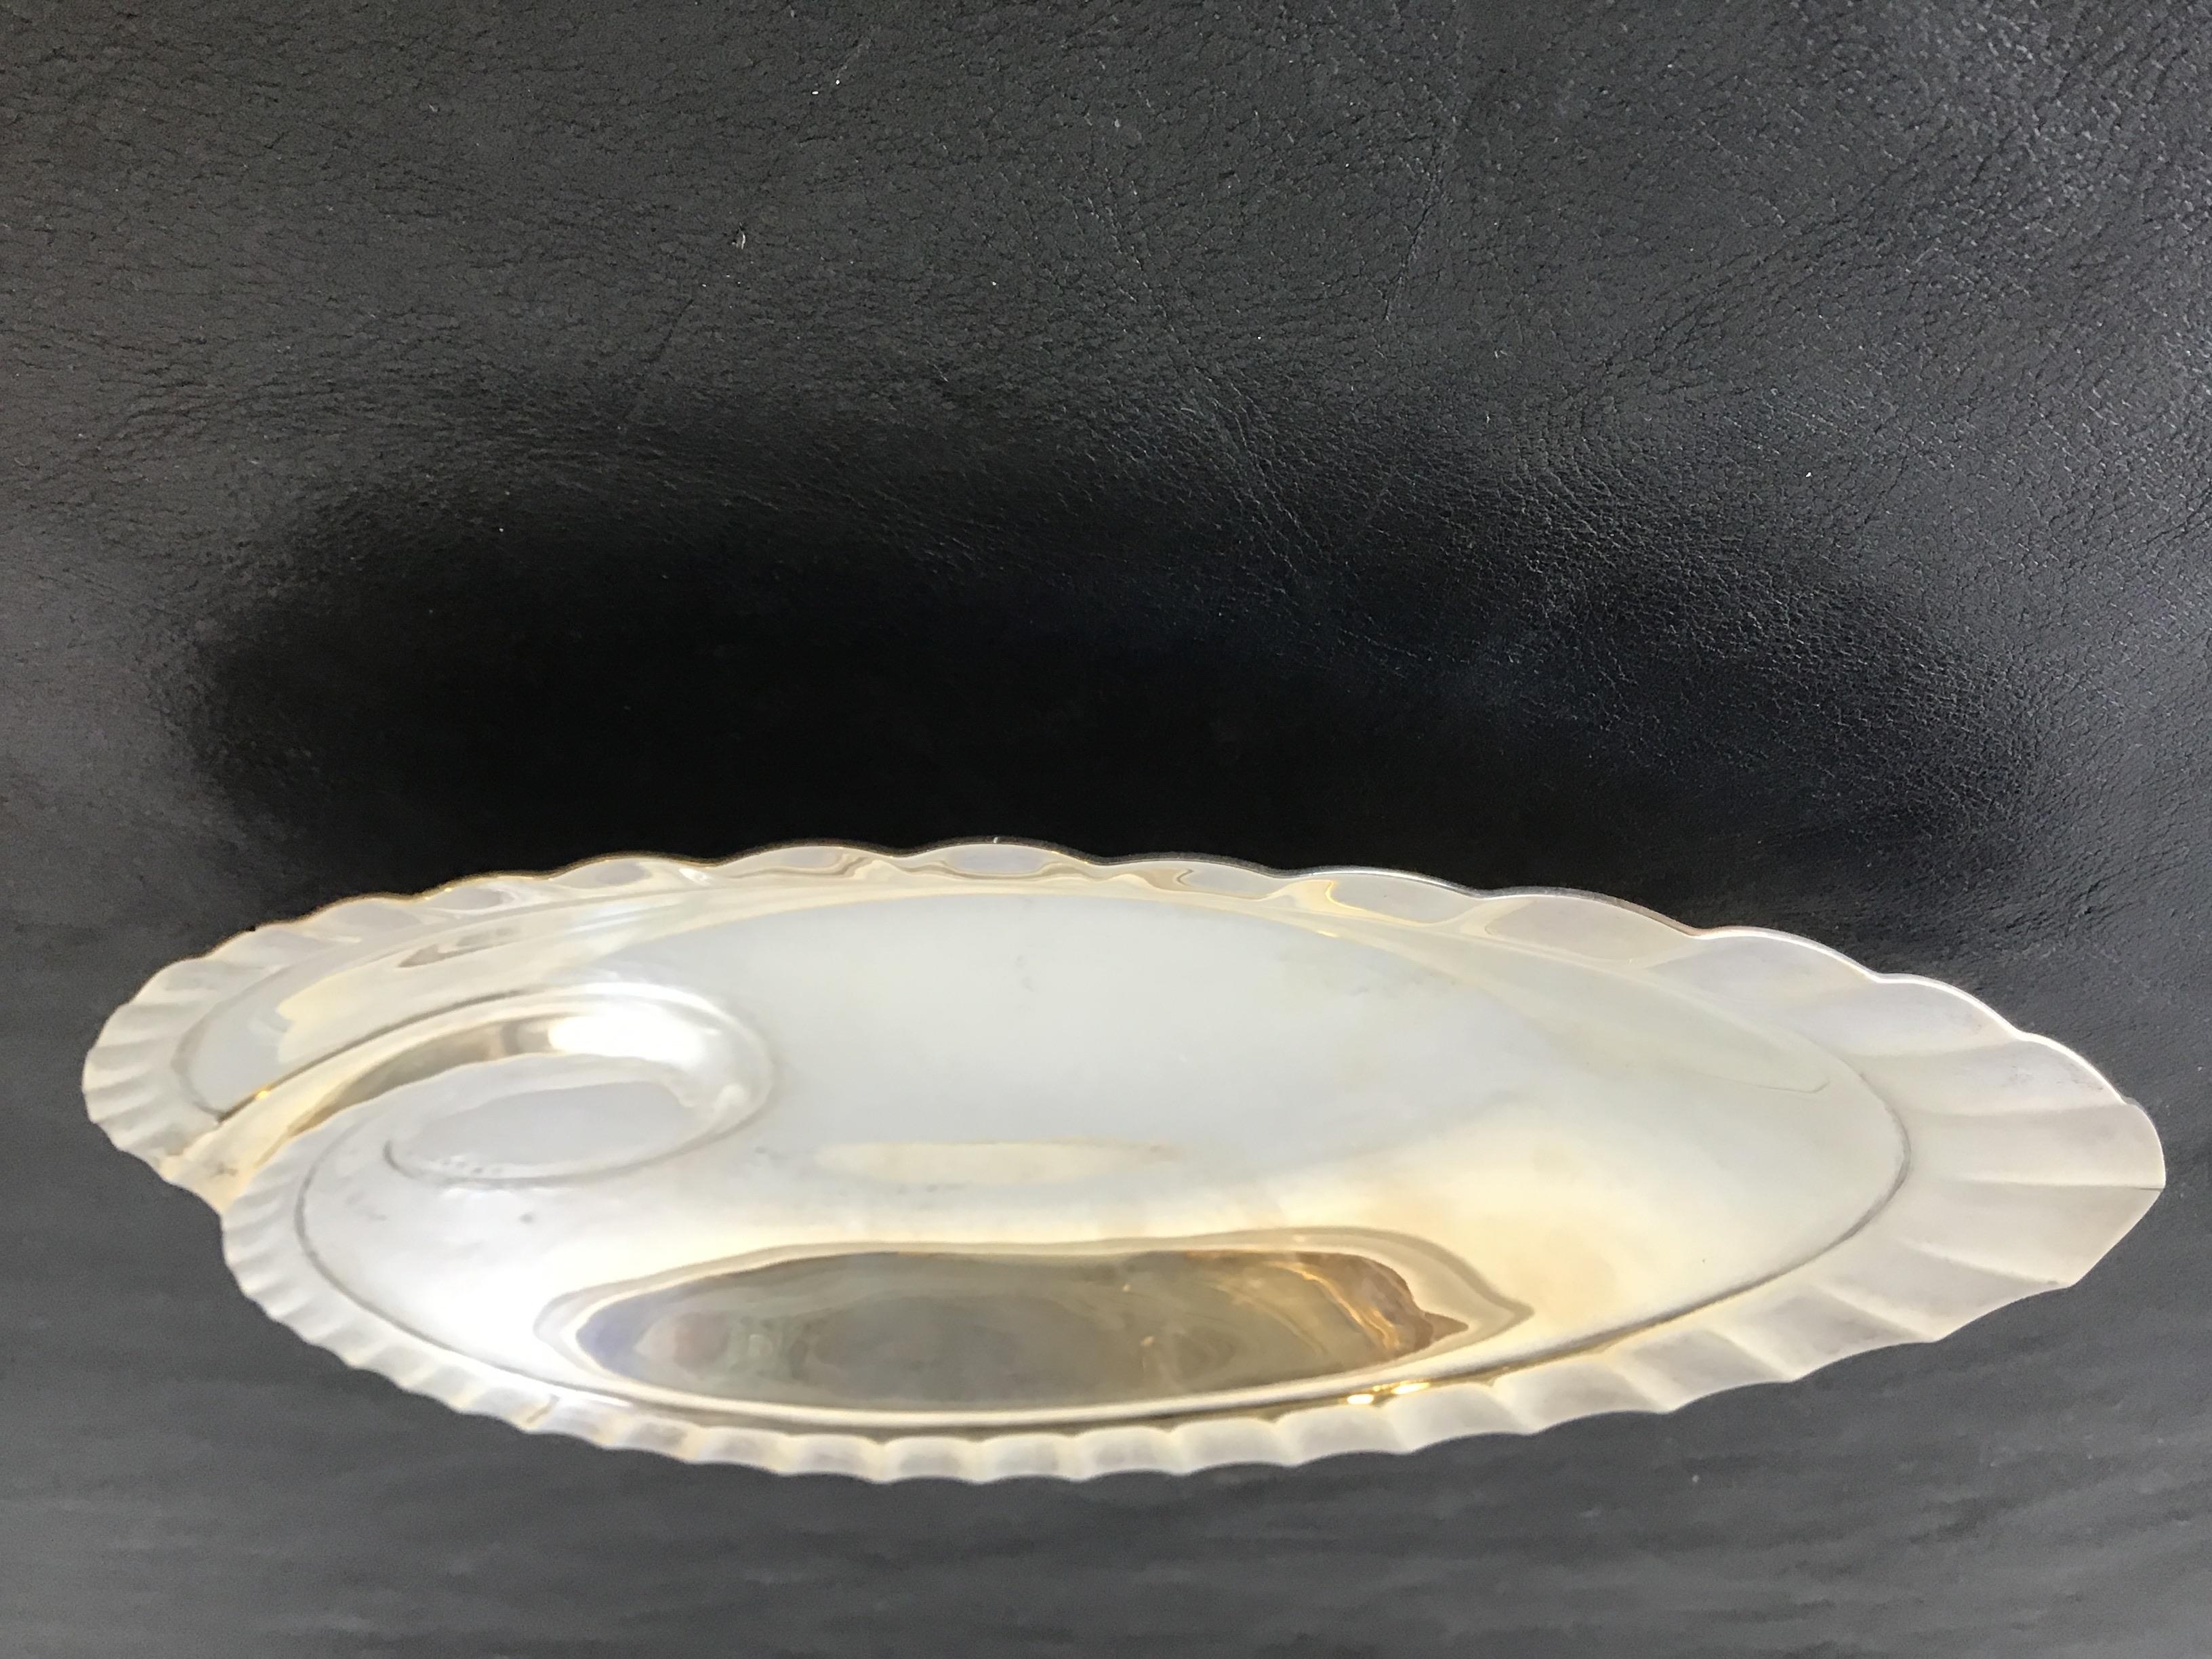 1960s Tiffany & Co. sterling silver dish. Weighs 9.4 ounces.